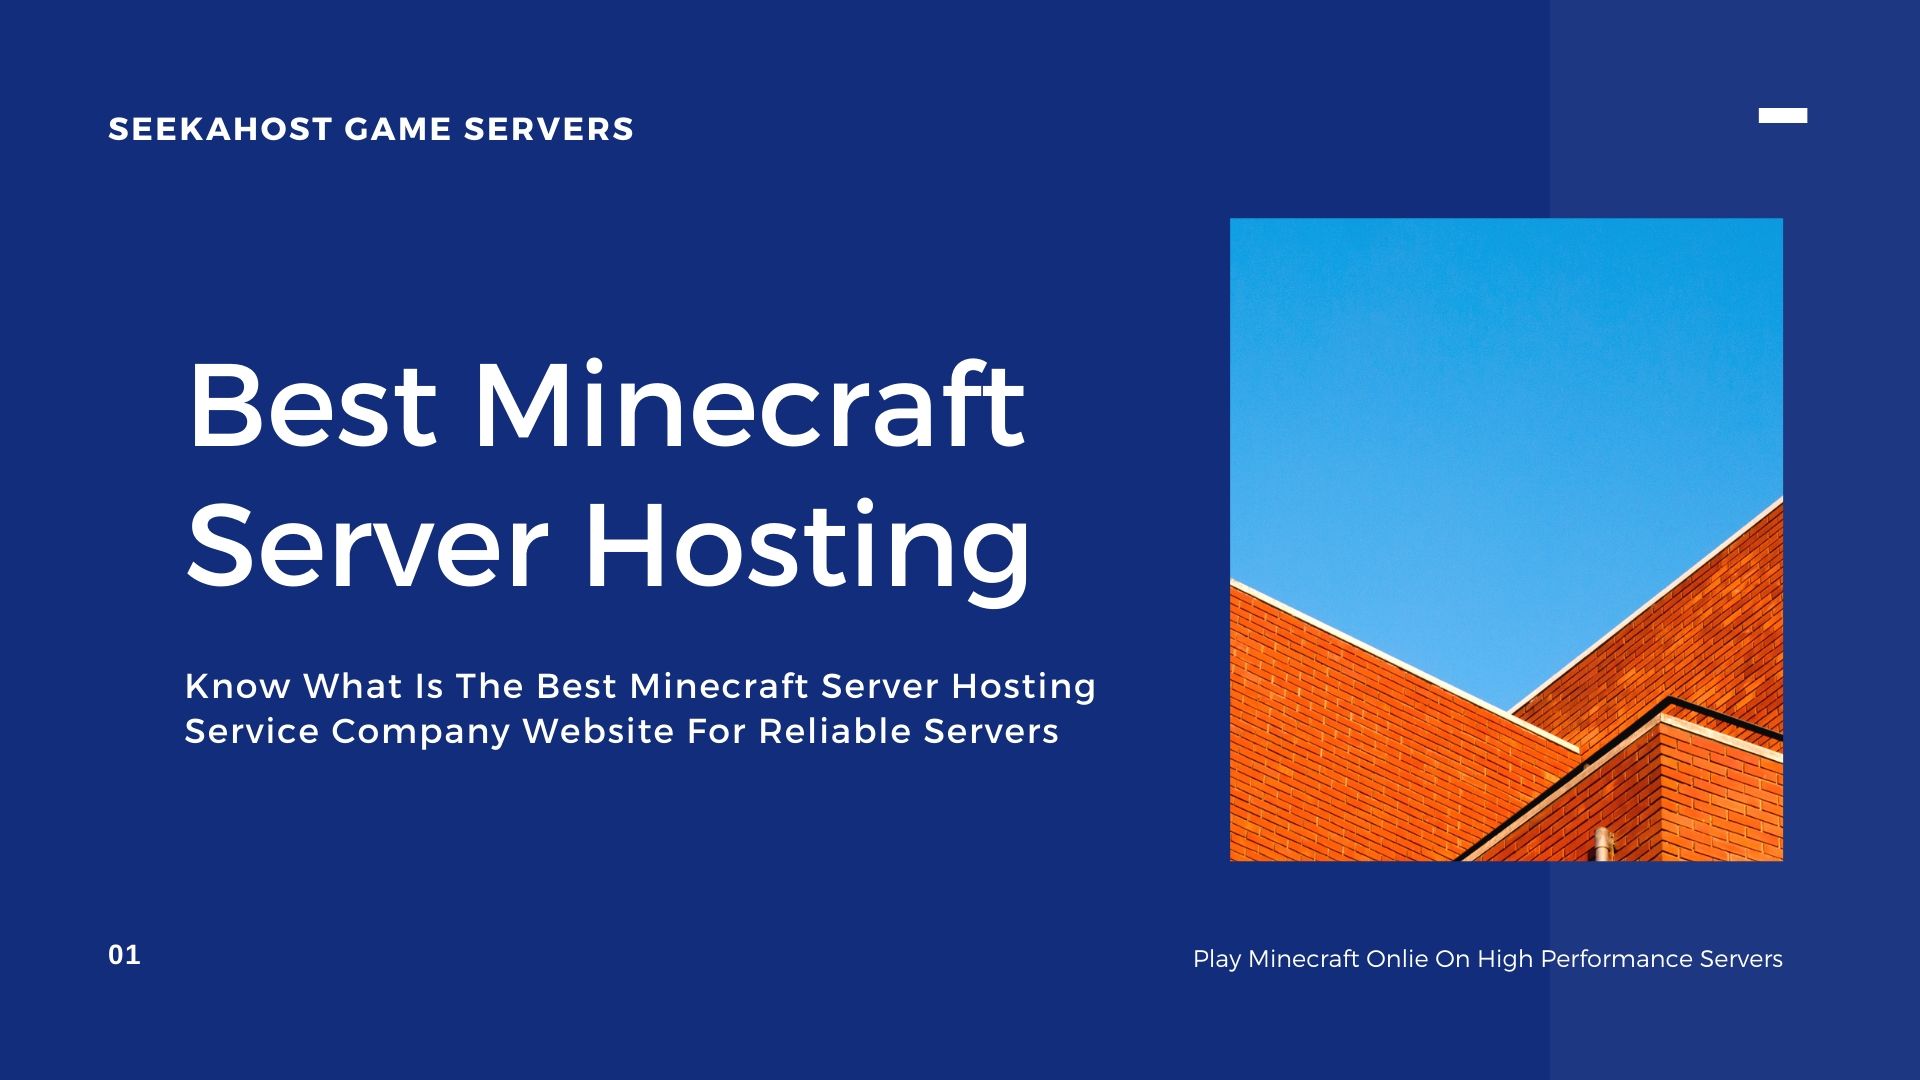 Why Do People Host Minecraft Servers?